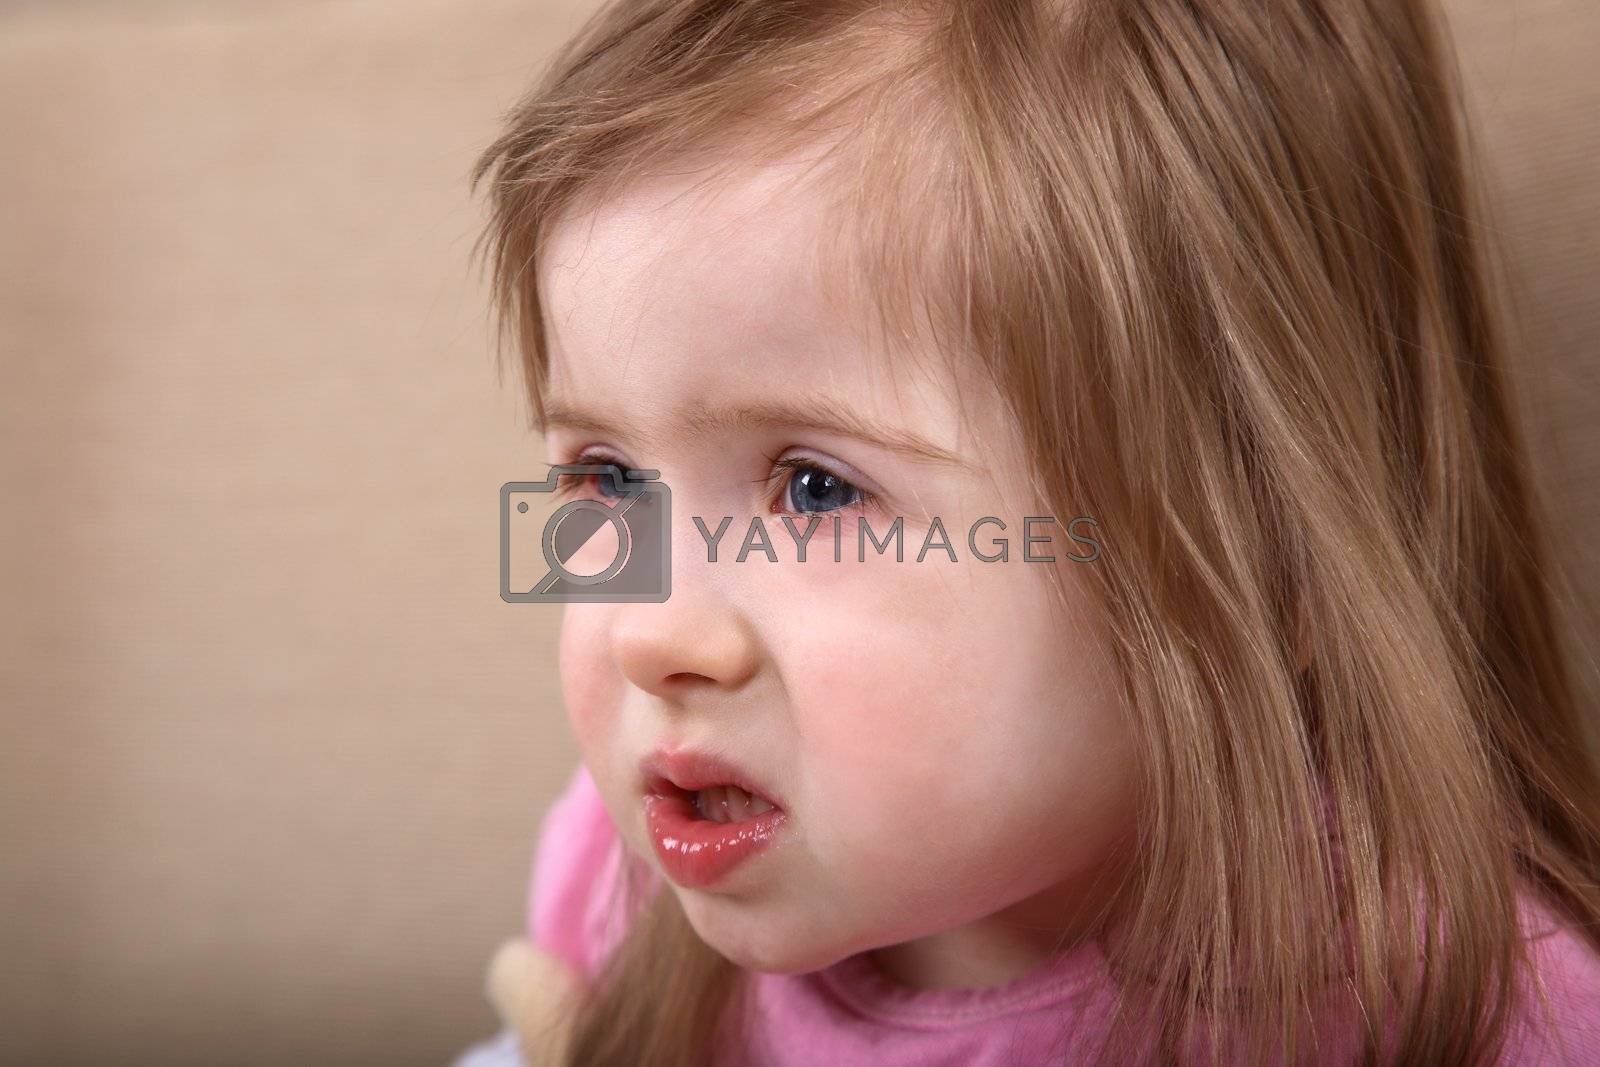 Royalty free image of Down syndrome girl by linea